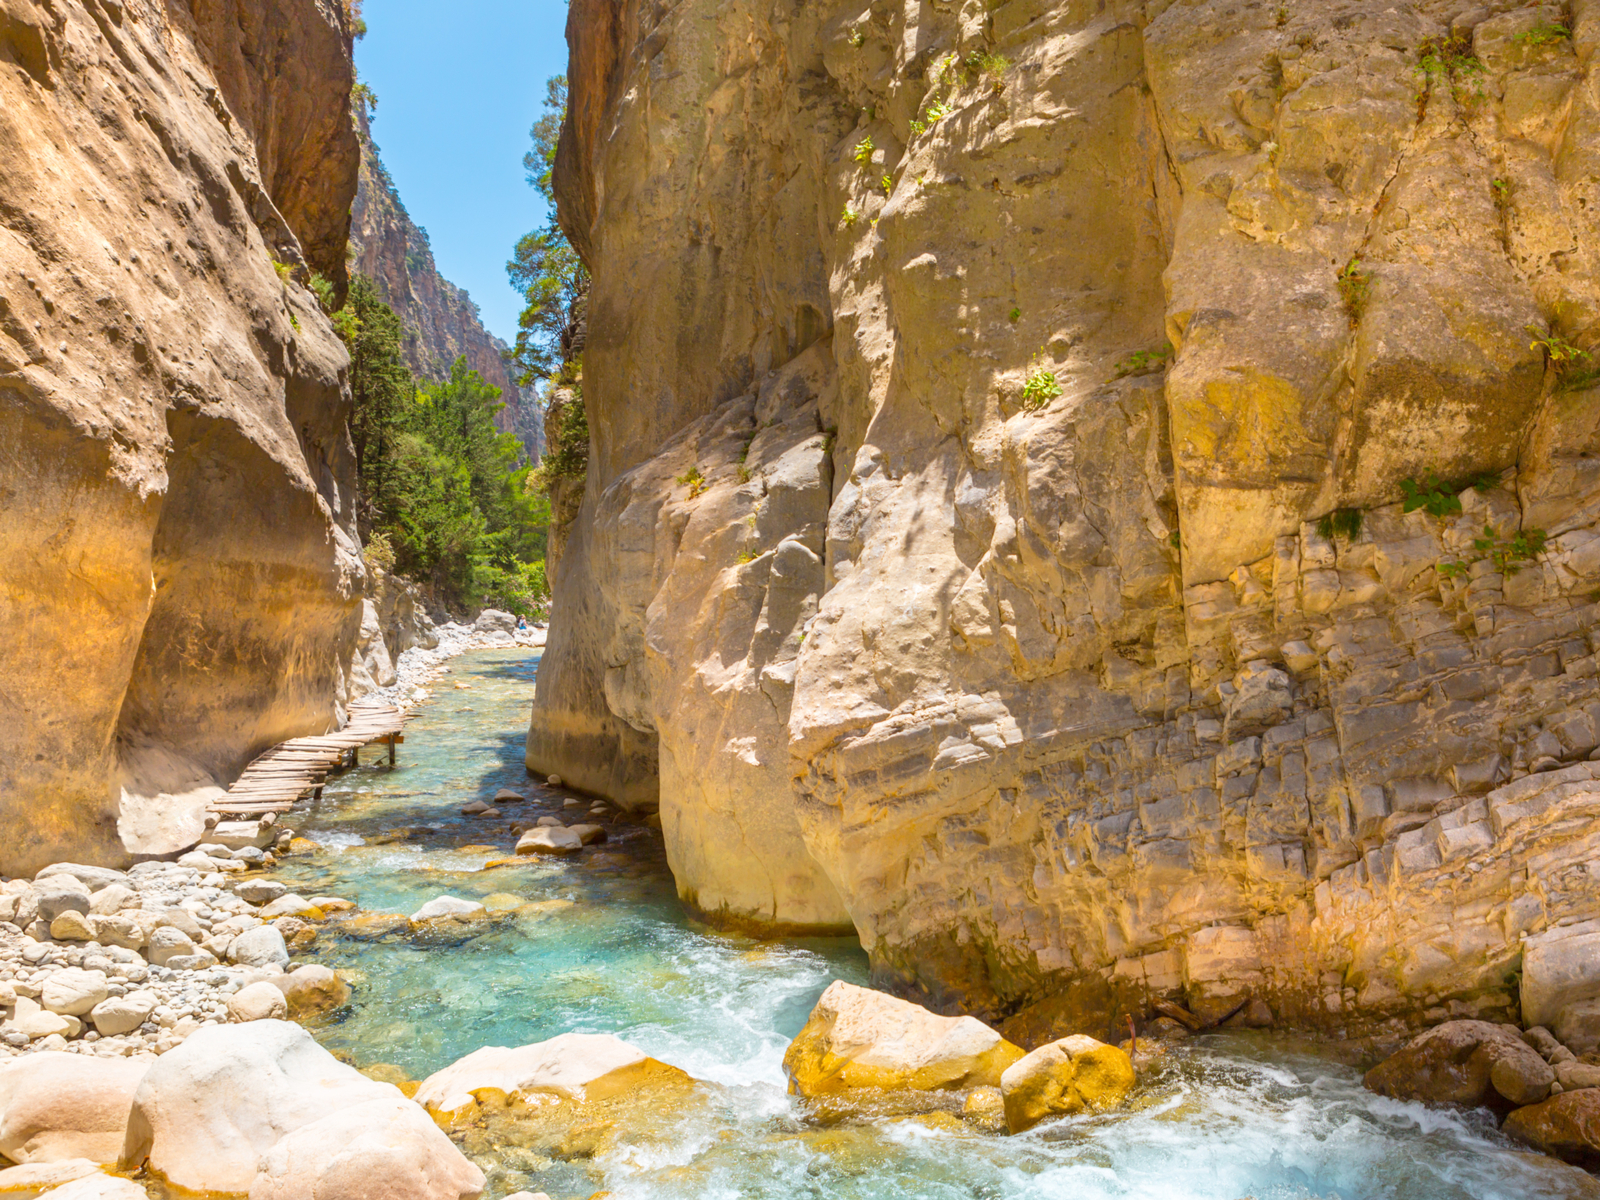 Image from one of the trails of the best hikes in the world, the Samaria Gorge